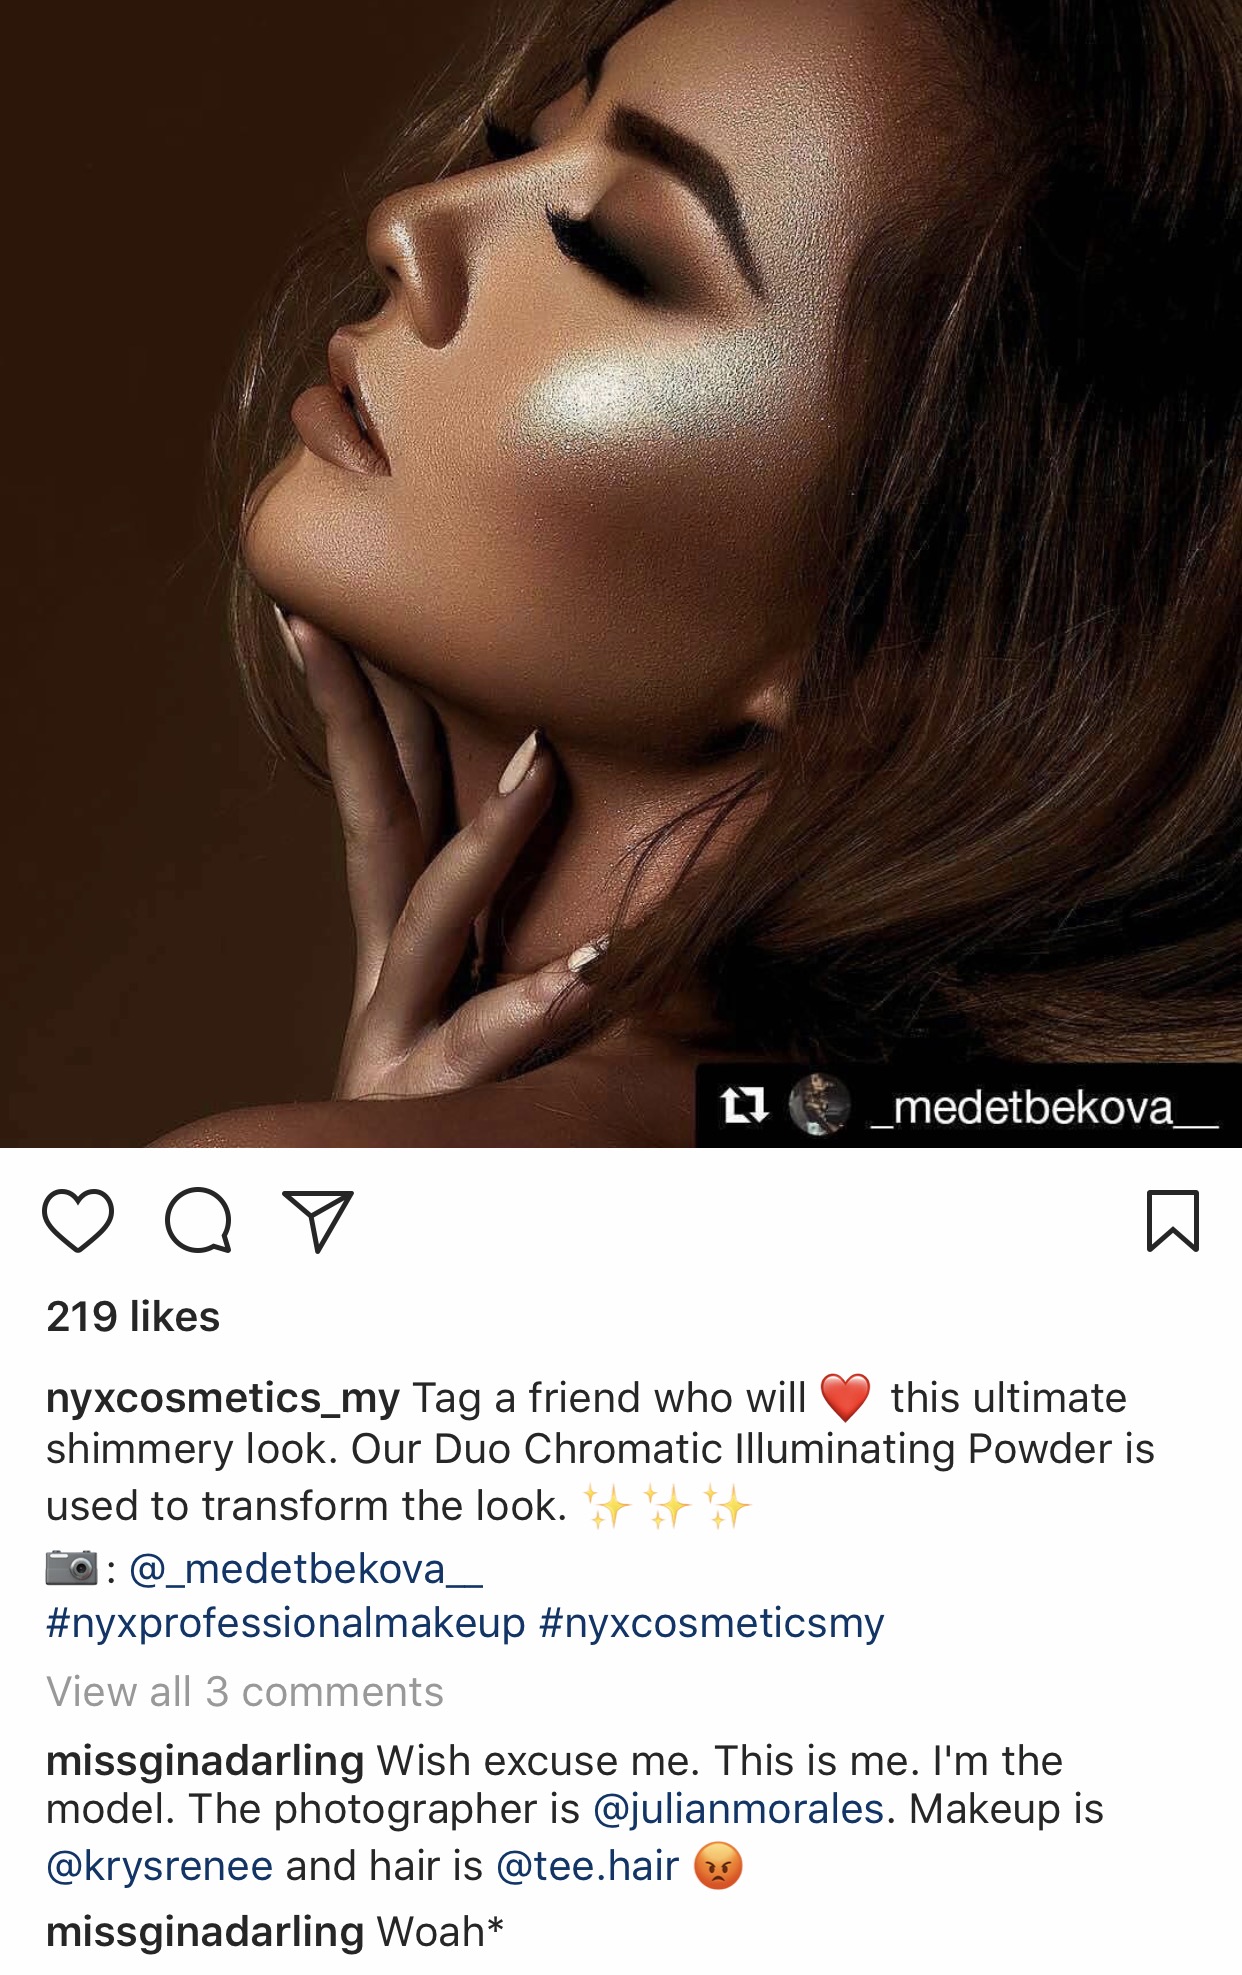 liars - beauty - ti _medetbekova Q y 219 nyxcosmetics_my Tag a friend who will this ultimate shimmery look. Our Duo Chromatic Illuminating Powder is used to transform the look. View all 3 missginadarling Wish excuse me. This is me. I'm the model. The phot